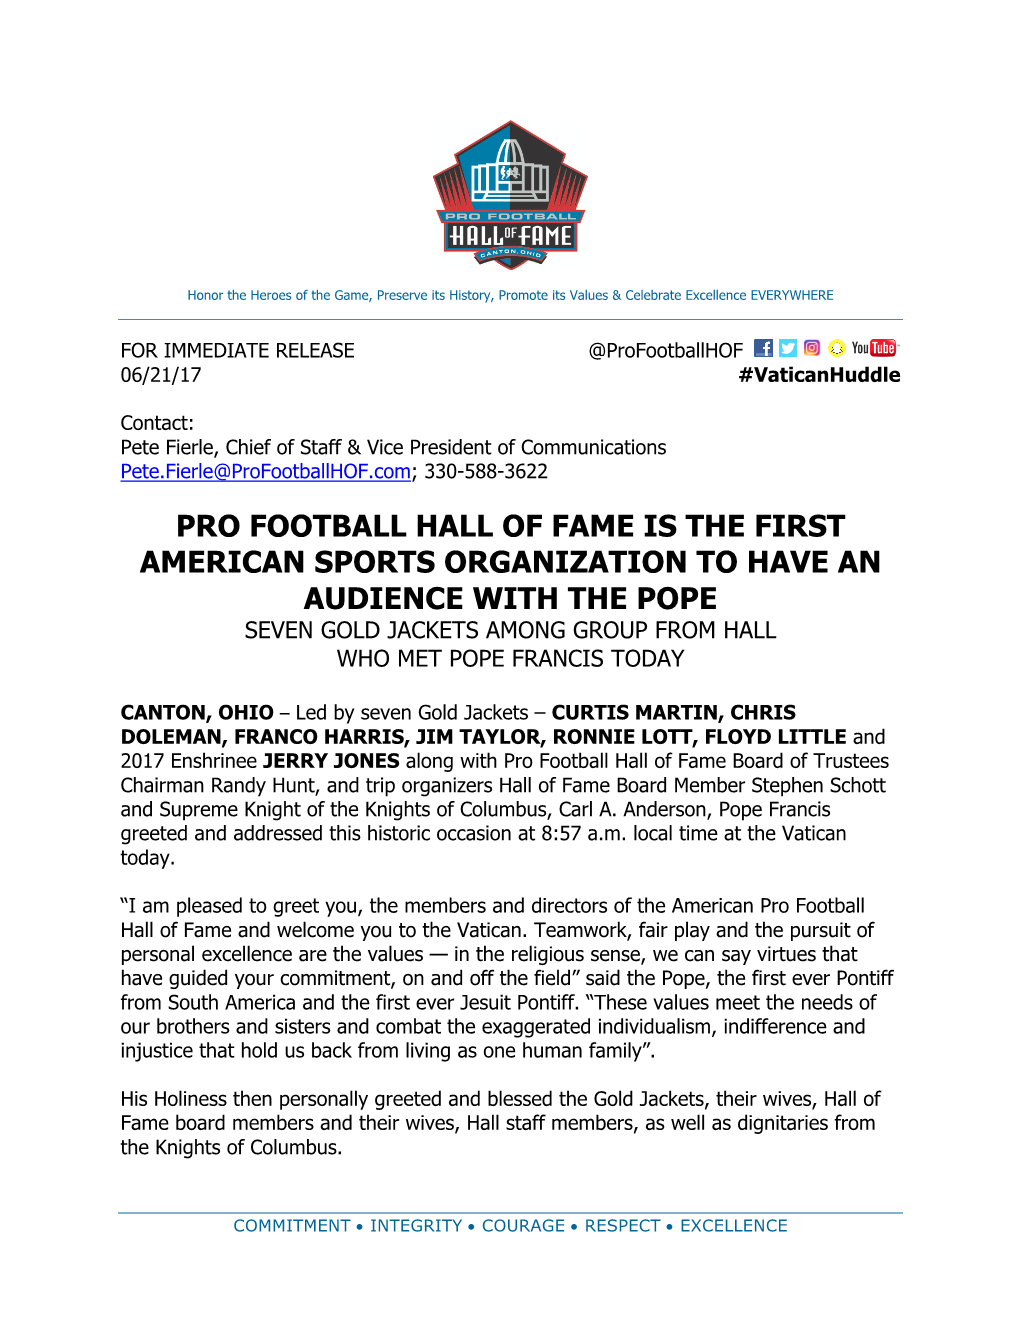 Pro Football Hall of Fame Is the First American Sports